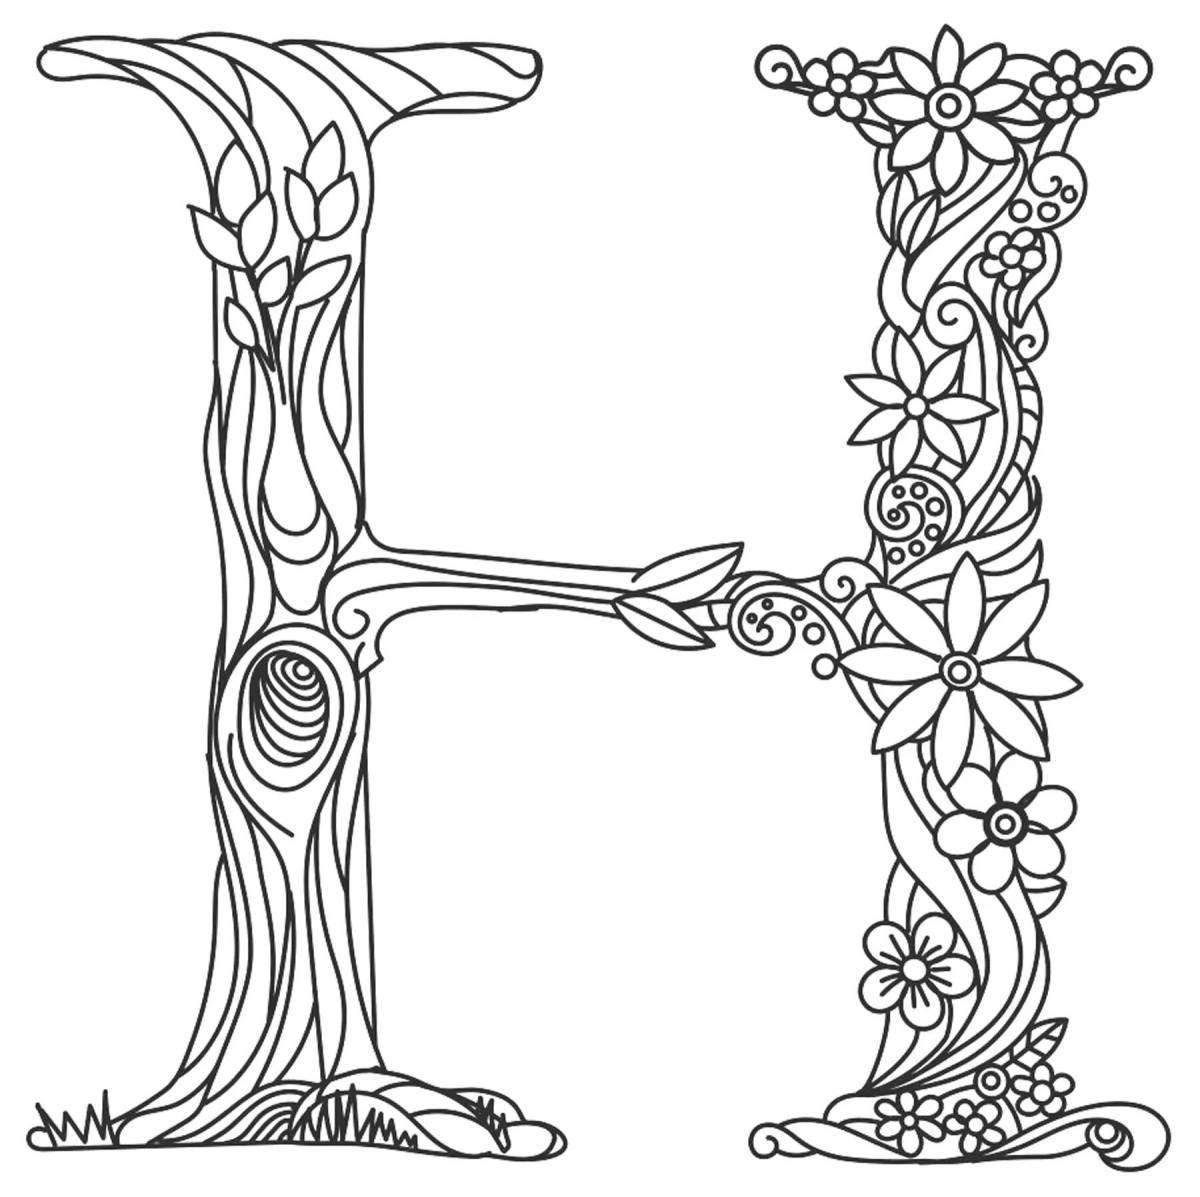 Glossy coloring initial letter slavic